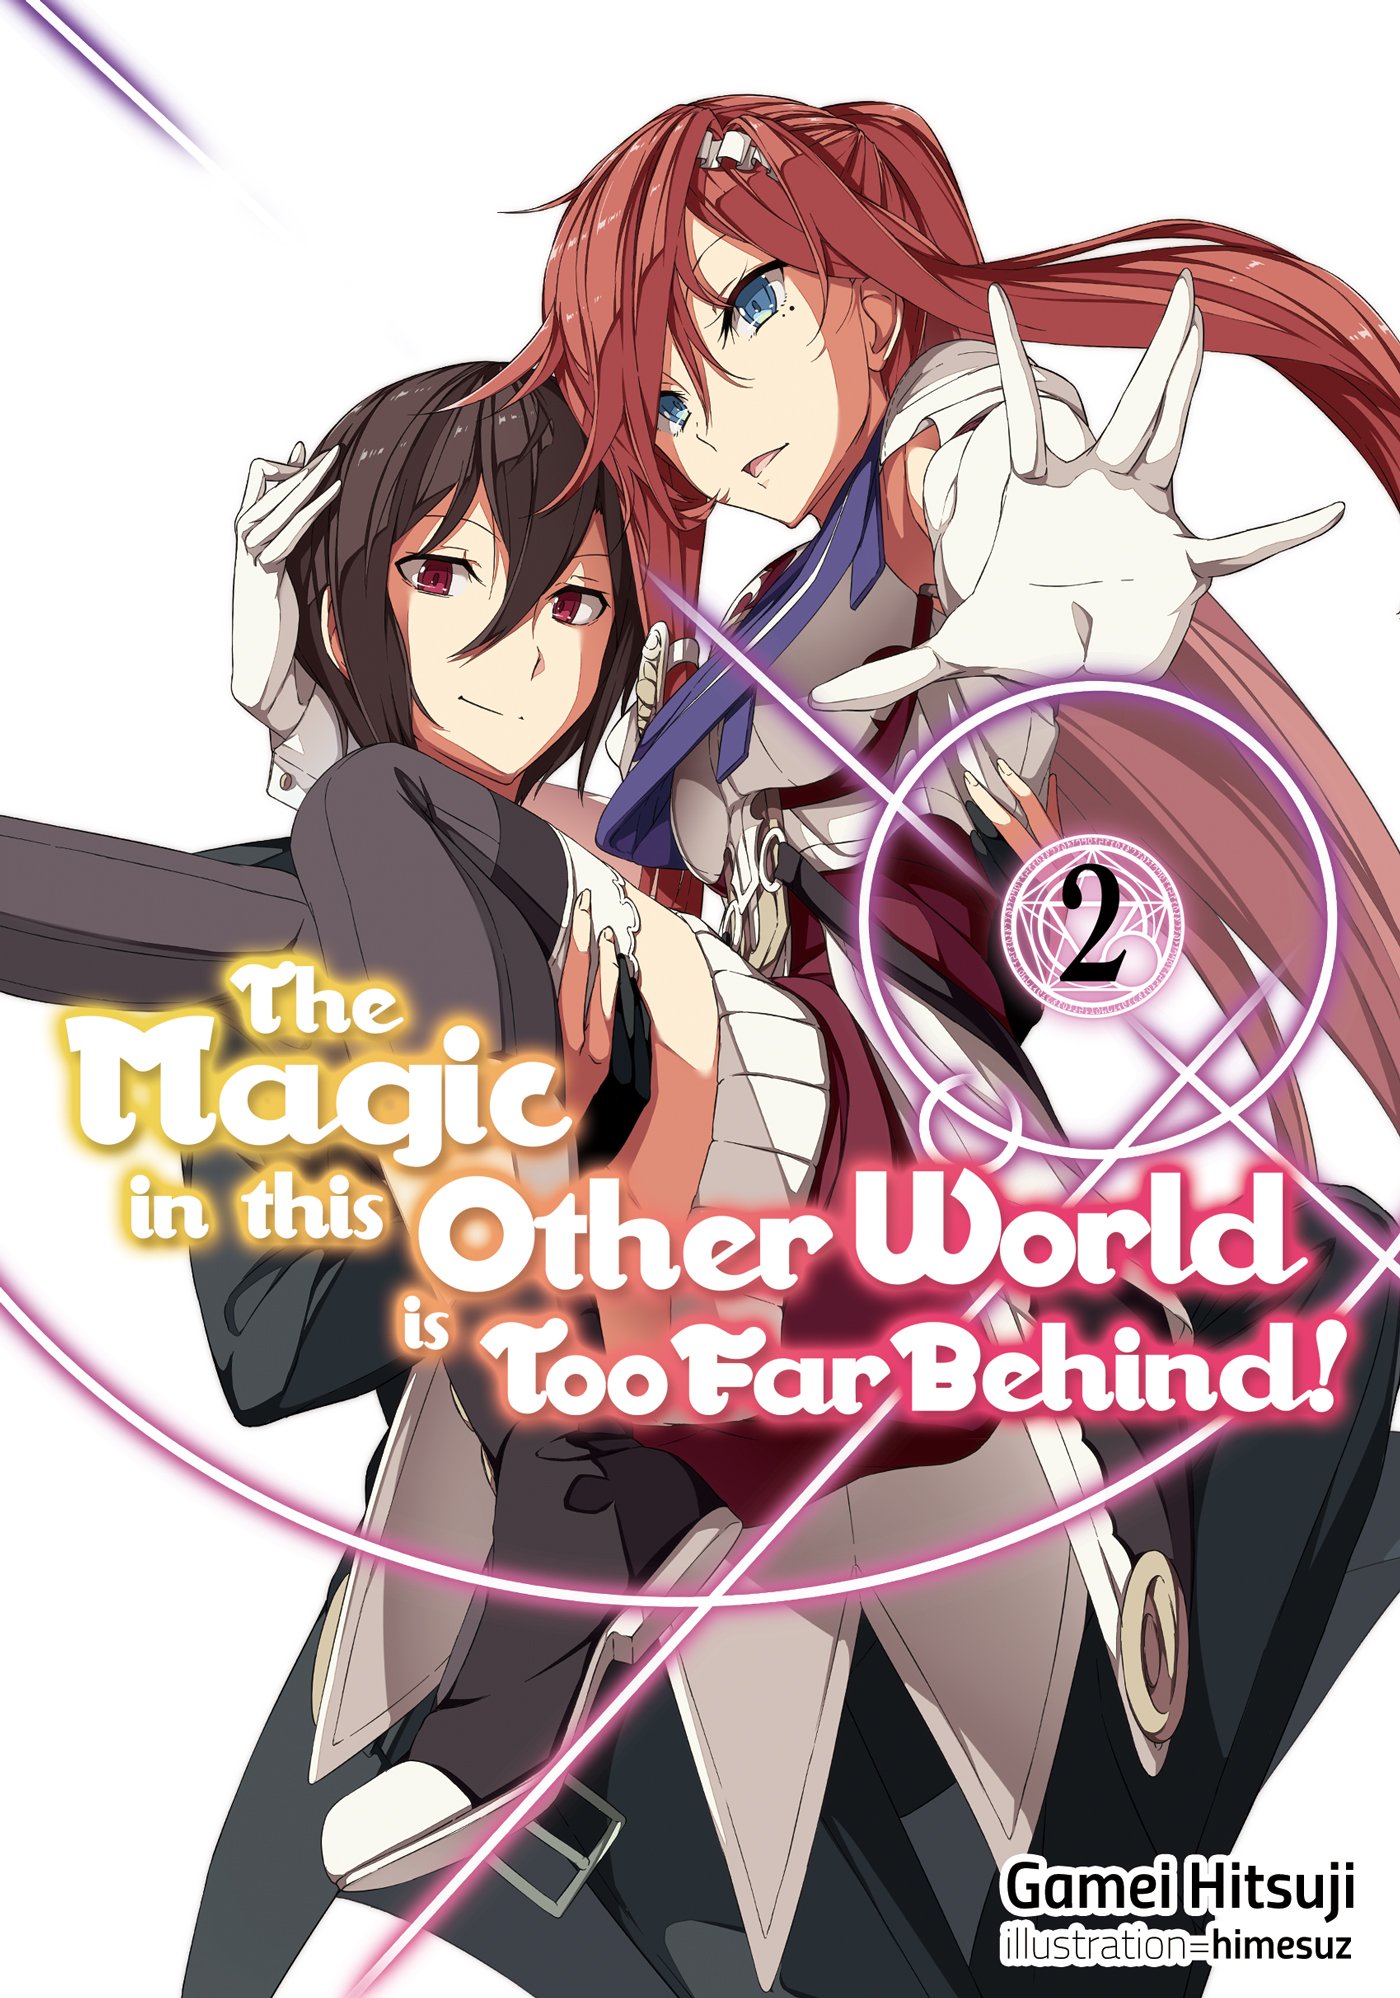 The Magic in this Other World is Too Far Behind! - Volume 2 | Gamei Hitsuji